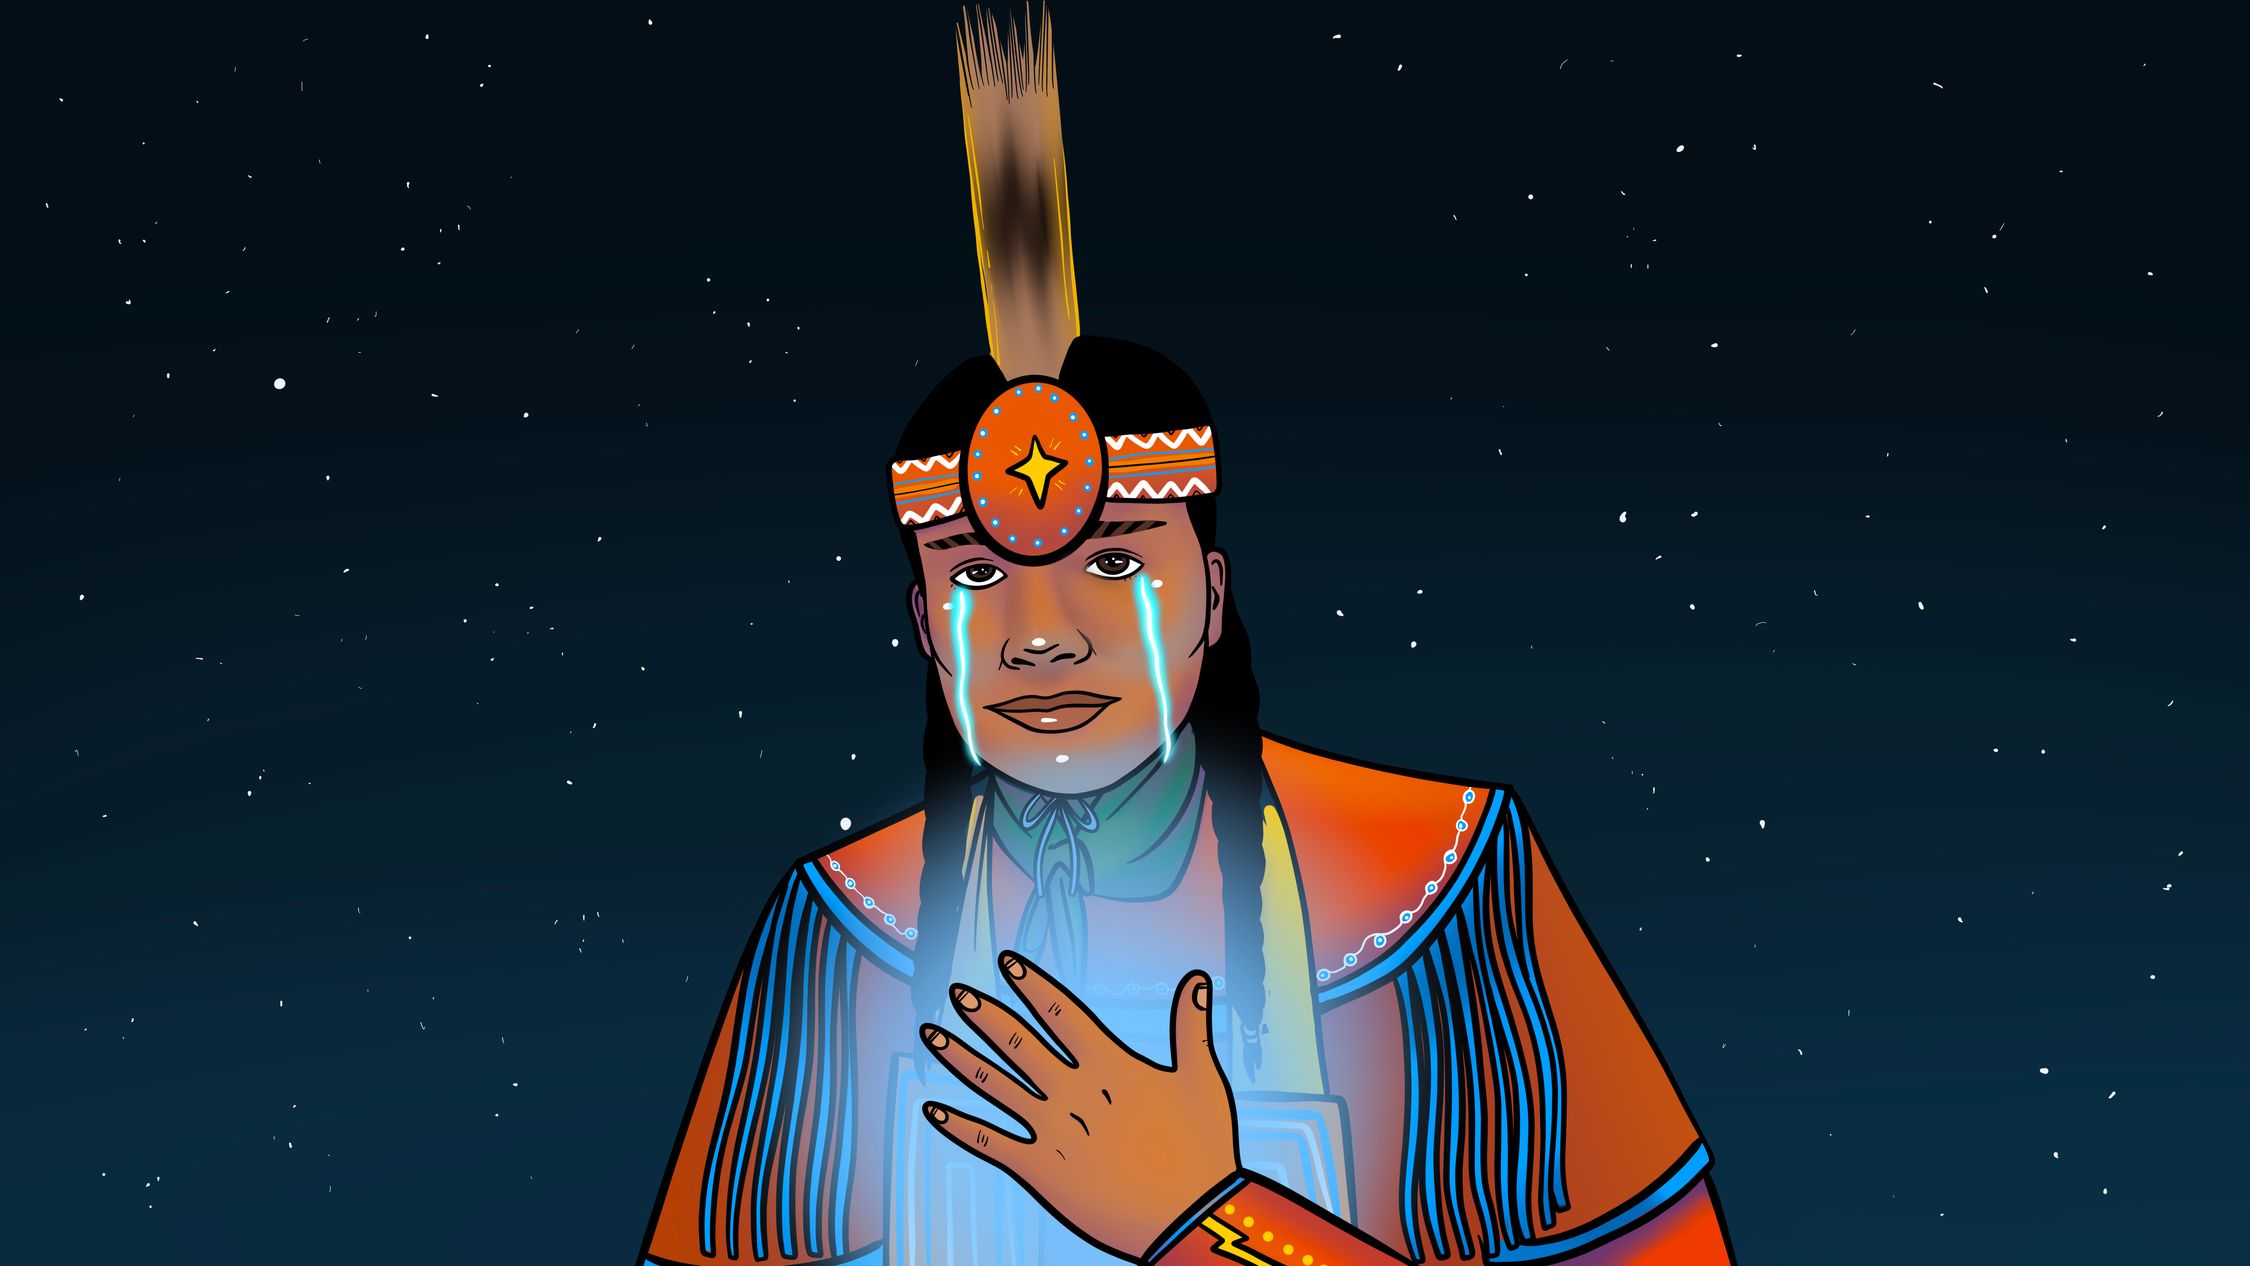 The image depicts an illustrated character wearing a traditional Anishinaabe headdress with a single feather extending upwards. The character has a solemn expression and has bright blue tears streaming down their face. Their left hand is placed over their chest, which is also glowing in blue light. They are set against a starry night sky, adding a serene or contemplative mood to the image. The character’s attire includes decorative elements and vibrant colours, suggesting a cultural or ceremonial significance.